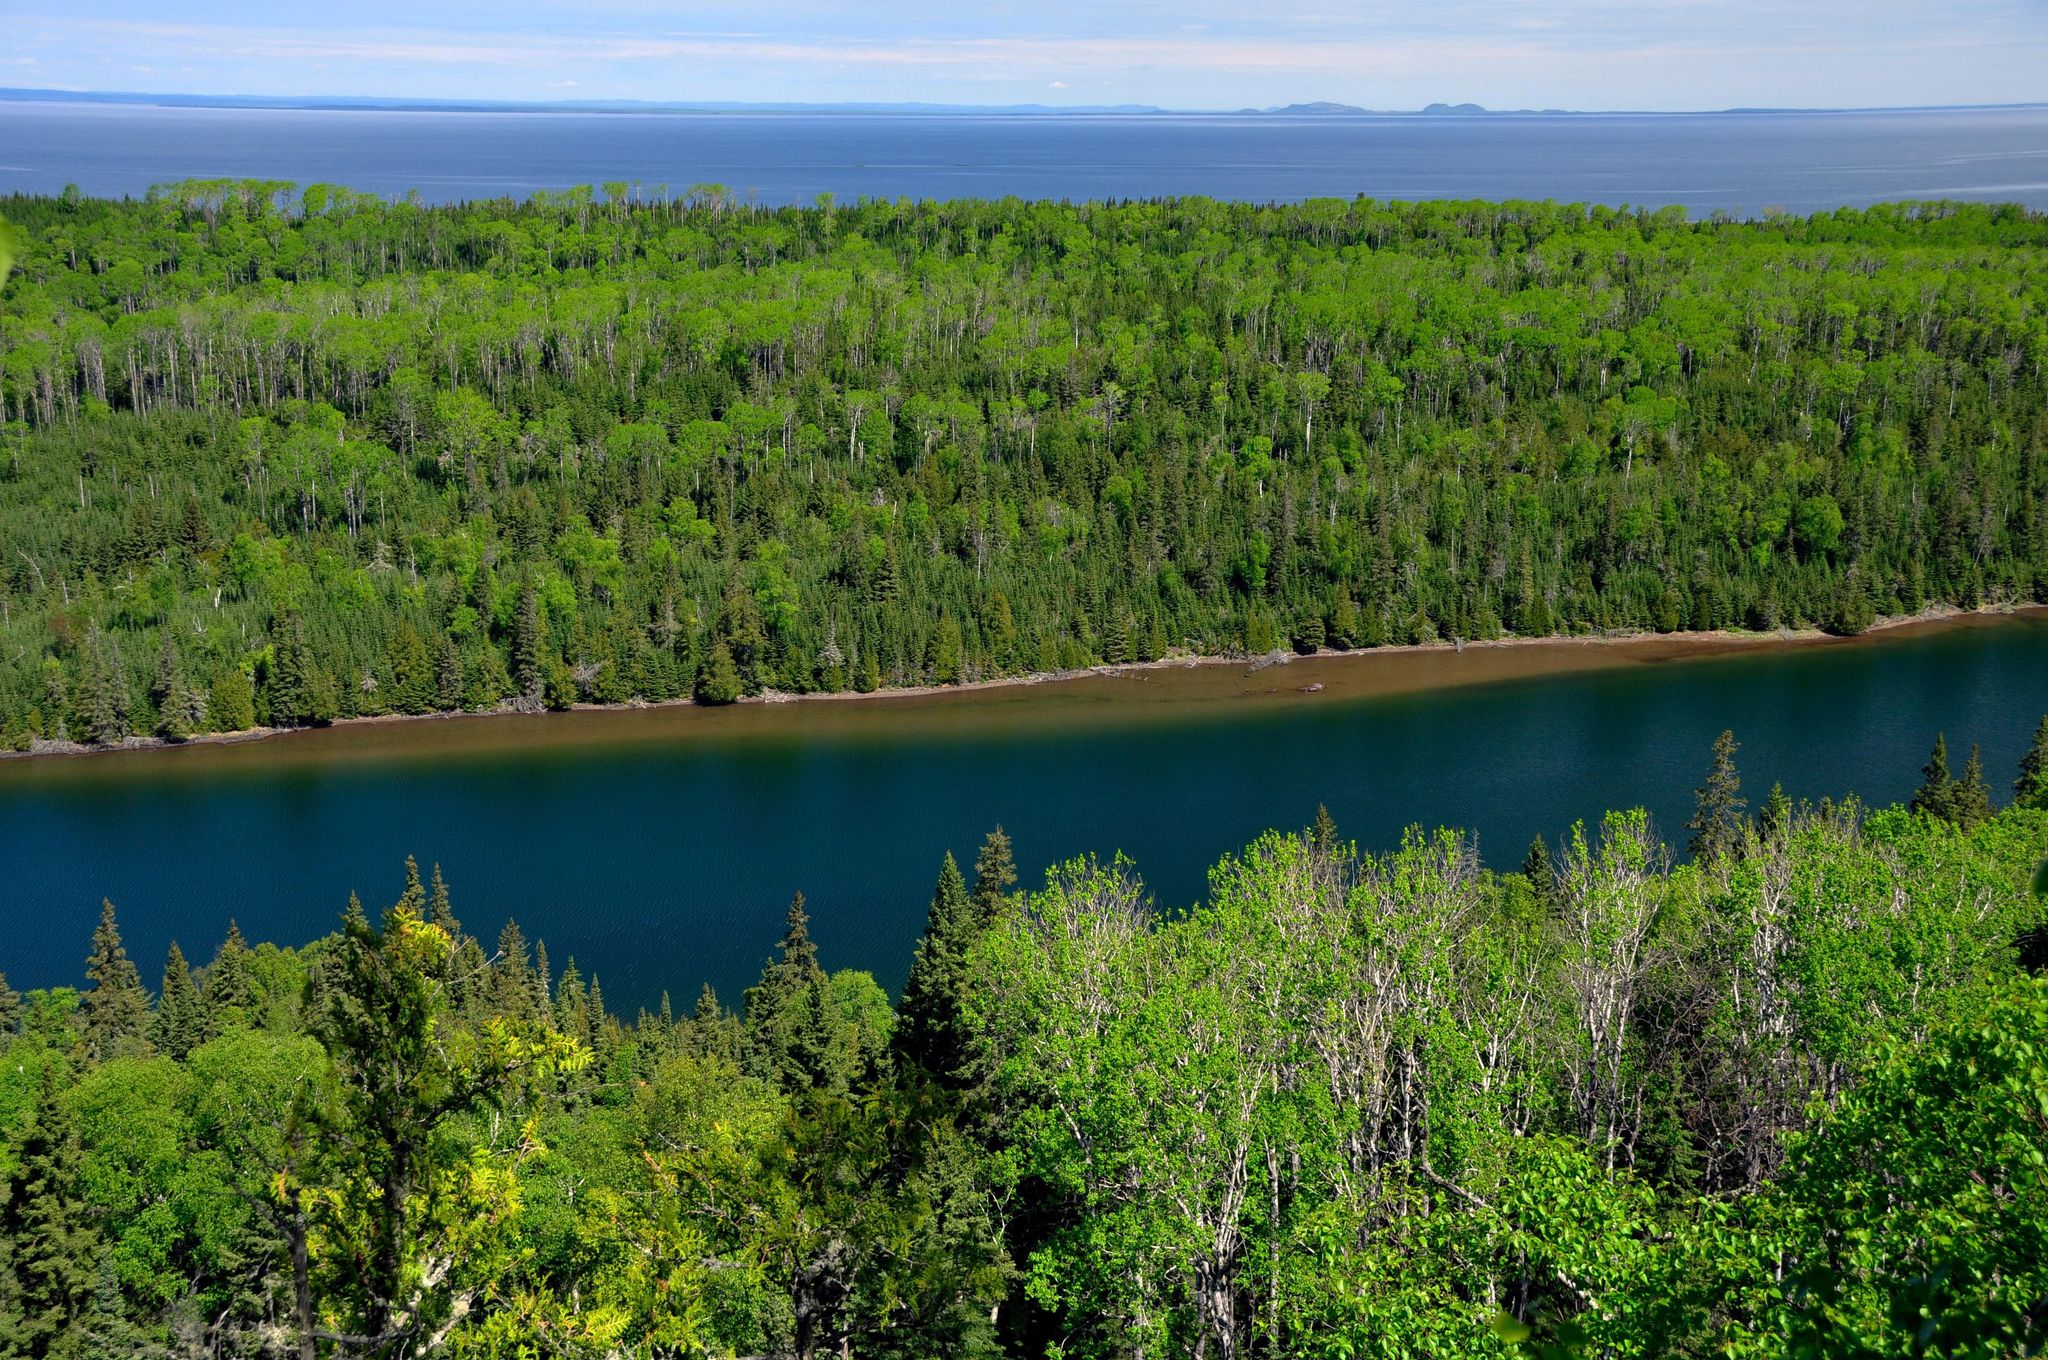 Isle Royale, located in the northwestern corner of Lake Superior, offers views of the Canadian shoreline.